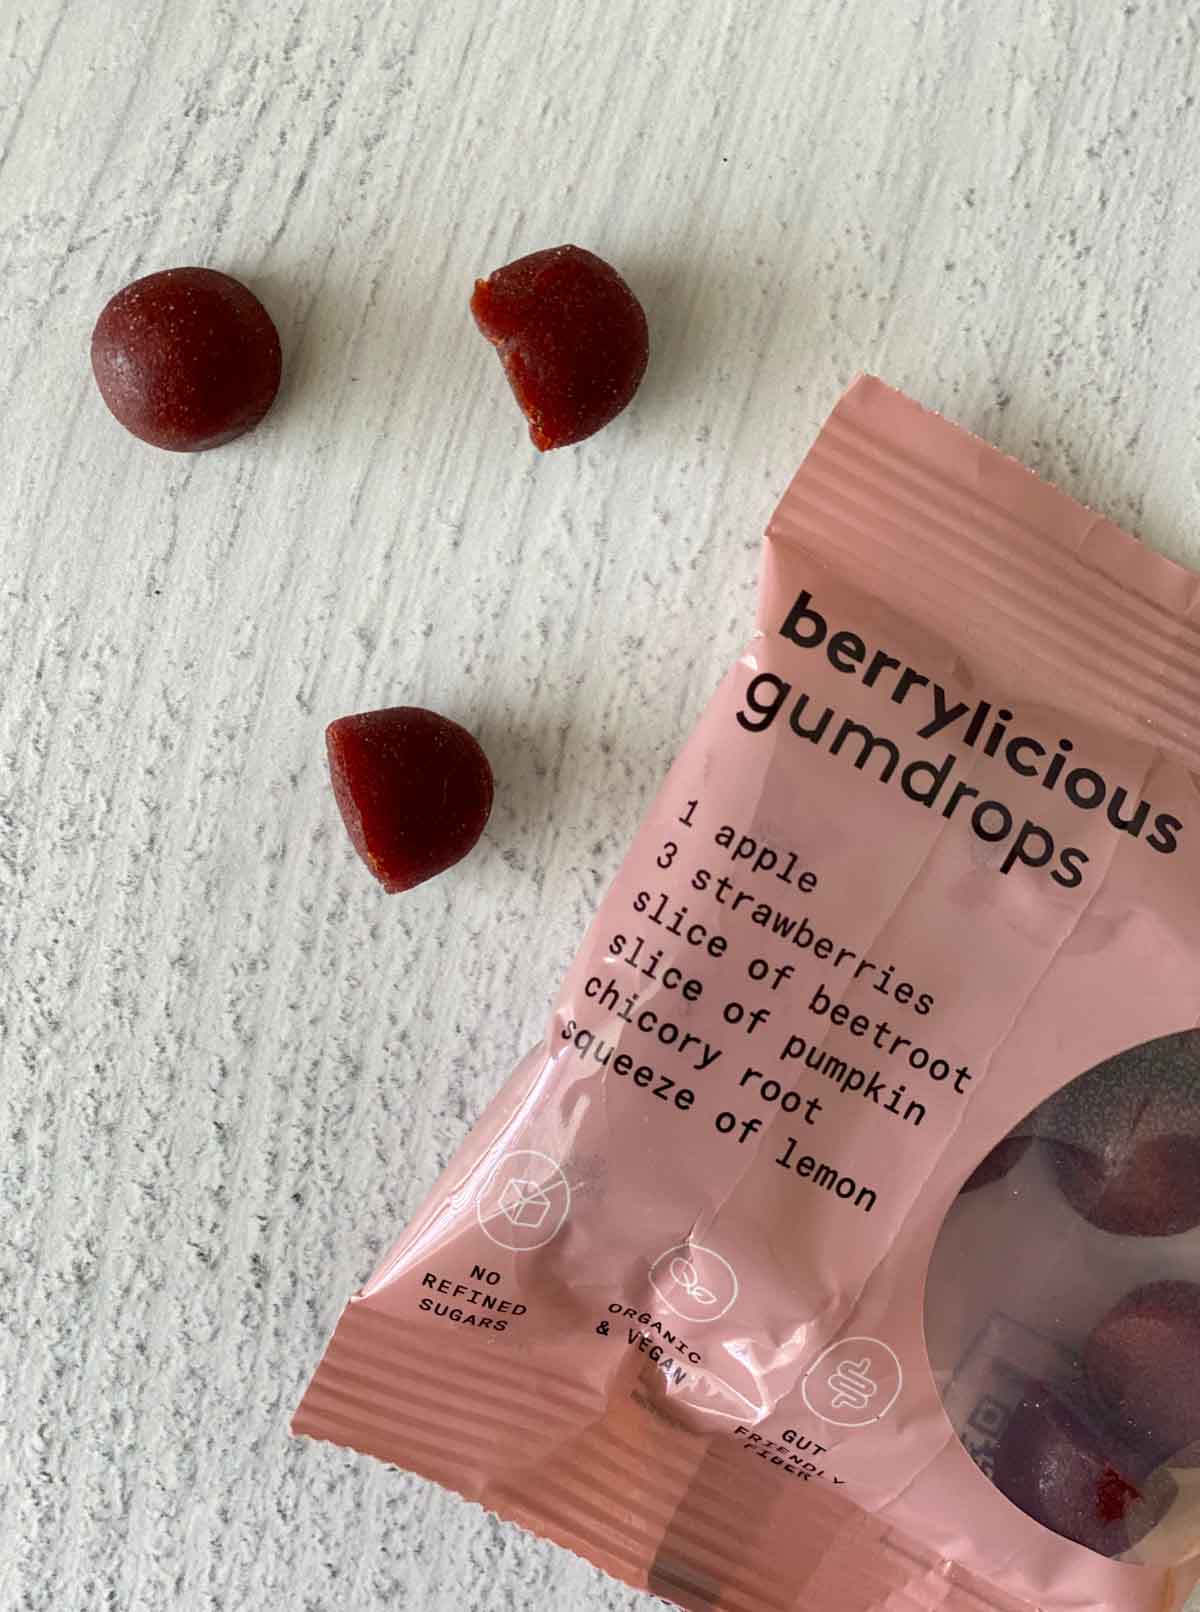 berrylicious gumdrops from kencko